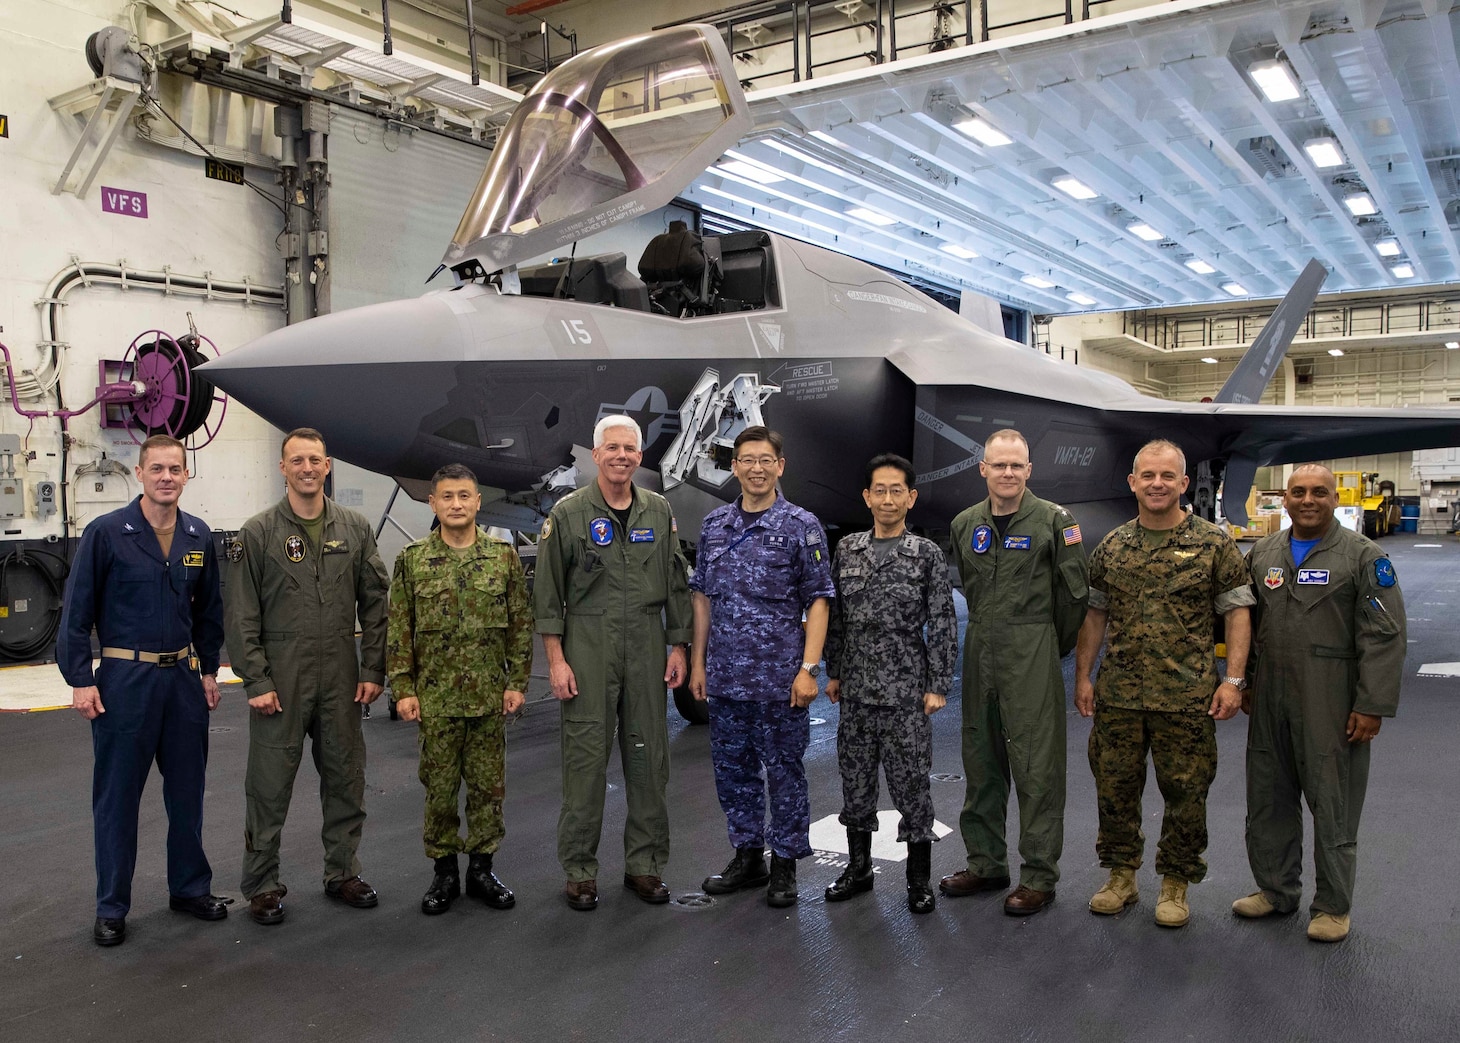 220603-N-TT639-1073 PACIFIC OCEAN (June 3, 2022) – Vice Adm. Hideki Yuasa, commander in chief, Self-Defense Fleet, center, Vice Adm. Karl Thomas commander, U.S. 7th Fleet, left of center, members of the Japanese Self Defense Force and U.S. Navy, Marine Corps, and Air Force pose for a photo during a tour aboard amphibious assault carrier USS Tripoli (LHA 7), June 3, 2022. Tripoli is operating in the U.S. 7th Fleet area of operations to enhance interoperability with allies and partners and serve as a ready response force to defend peace and maintain stability in the Indo-Pacific region.  (U.S. Navy photo by Mass Communication Specialist 3rd Class Christopher Sypert)